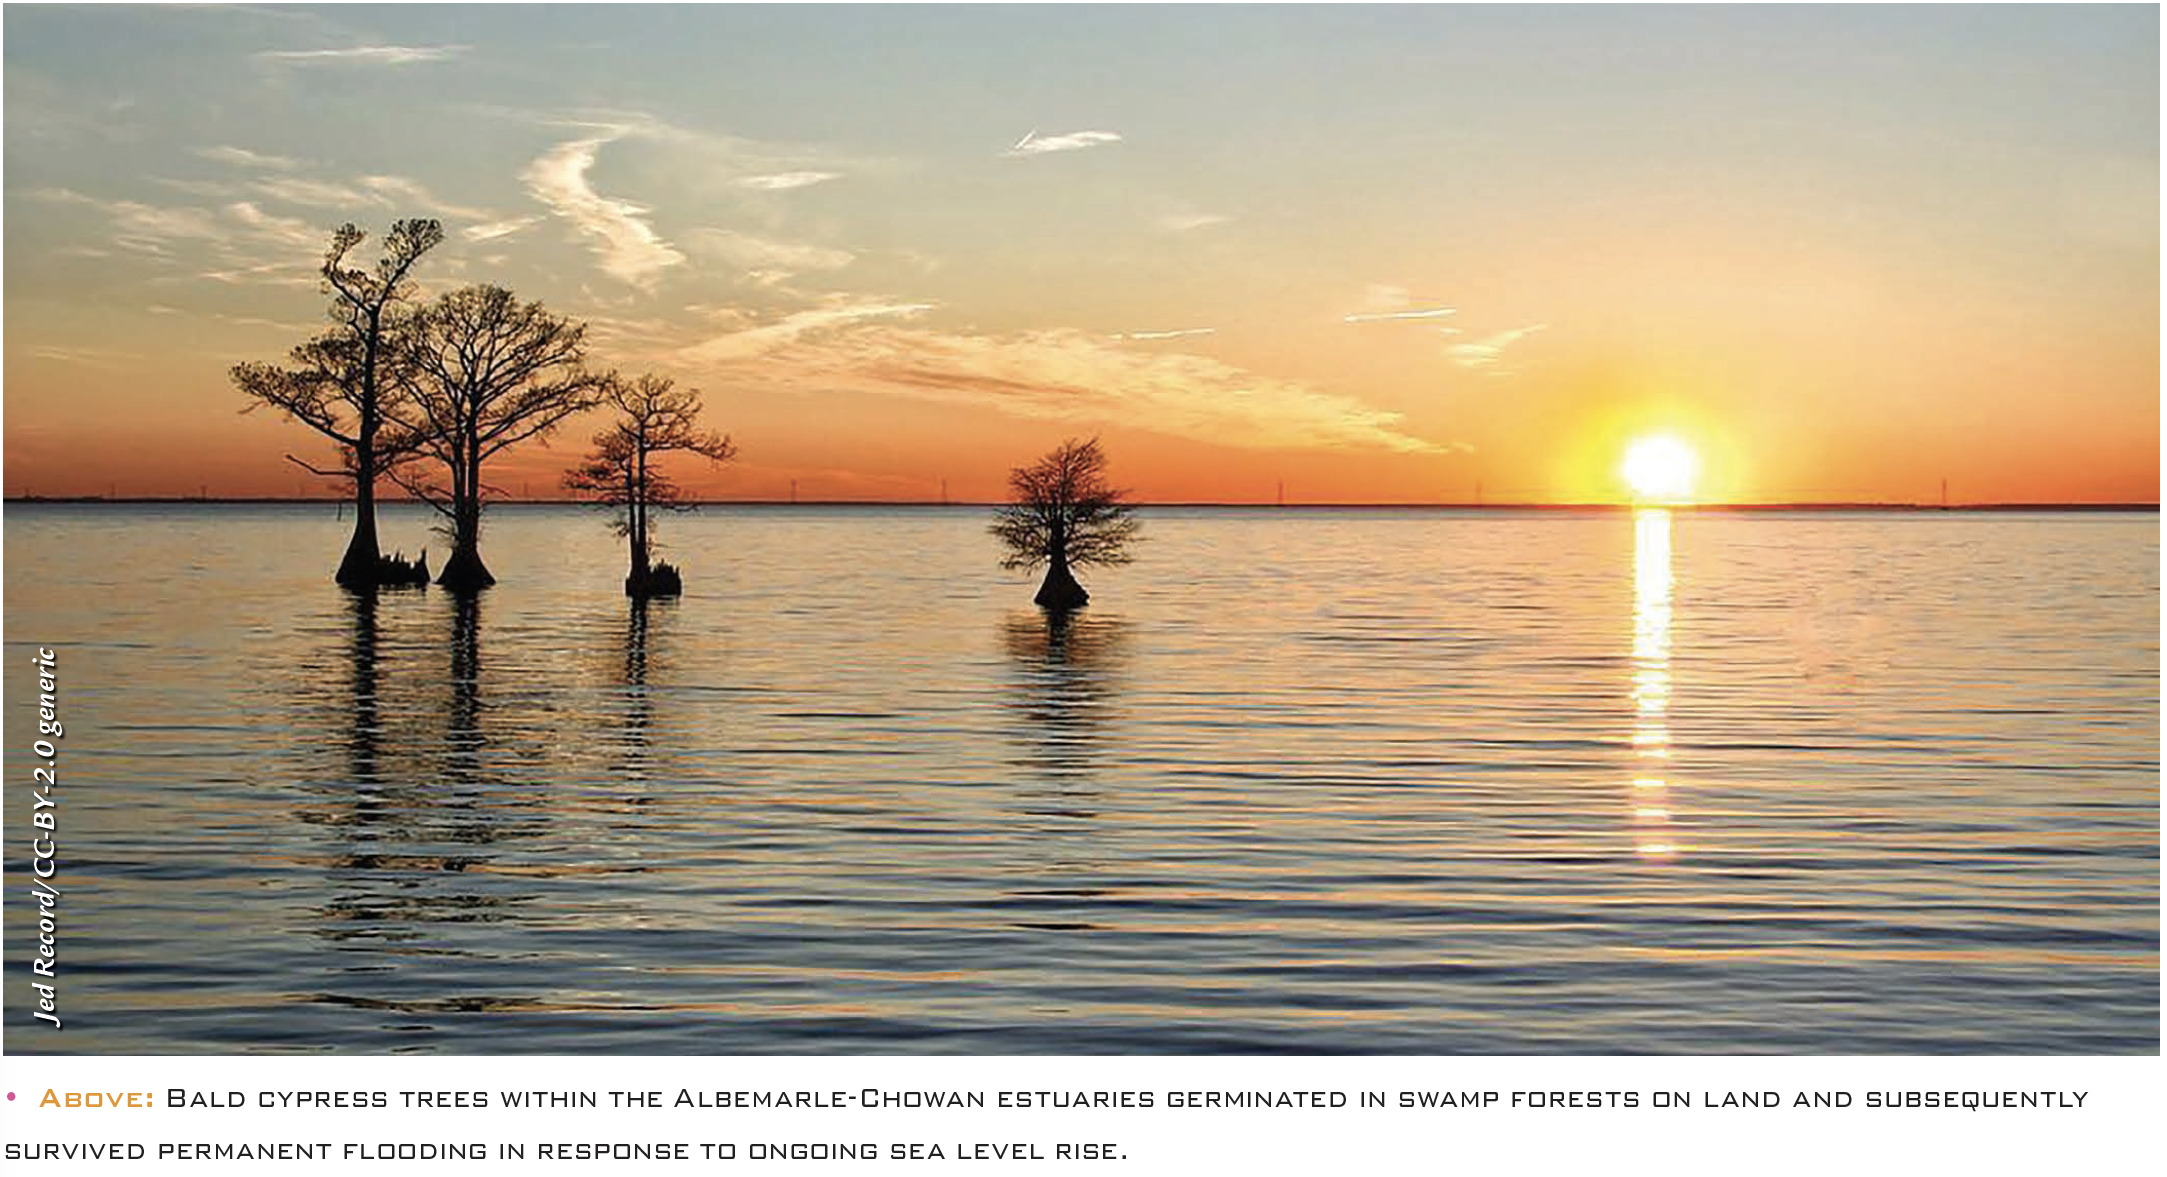 • Above: Bald cypress trees within the Albemarle-Chowan estuaries germinated in swamp forests on land and subsequently survived permanent flooding in response to ongoing sea level rise.